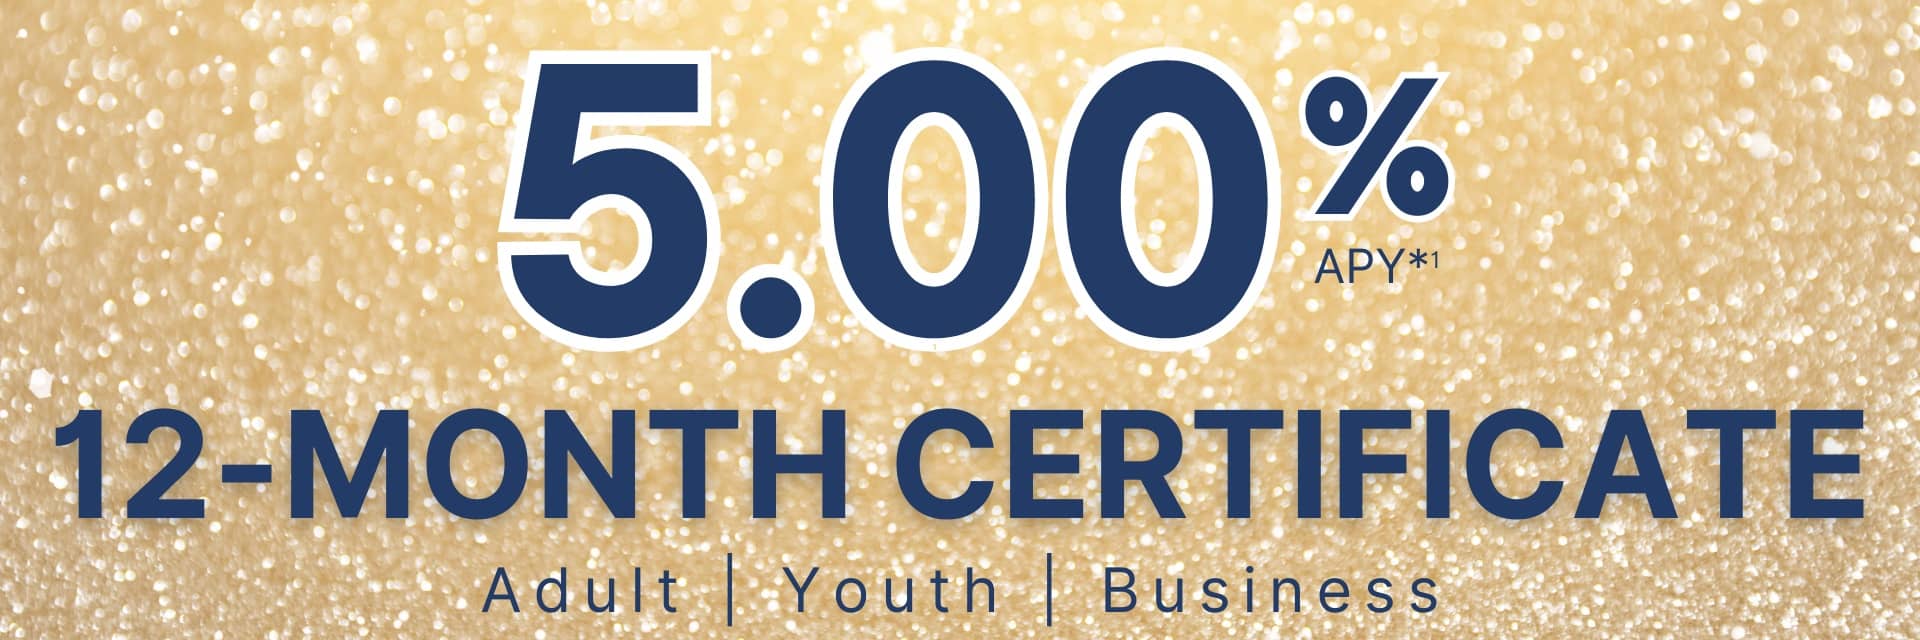 5.00% APY 12 month certificate for adults, youth and businesses at Armco Credit Union